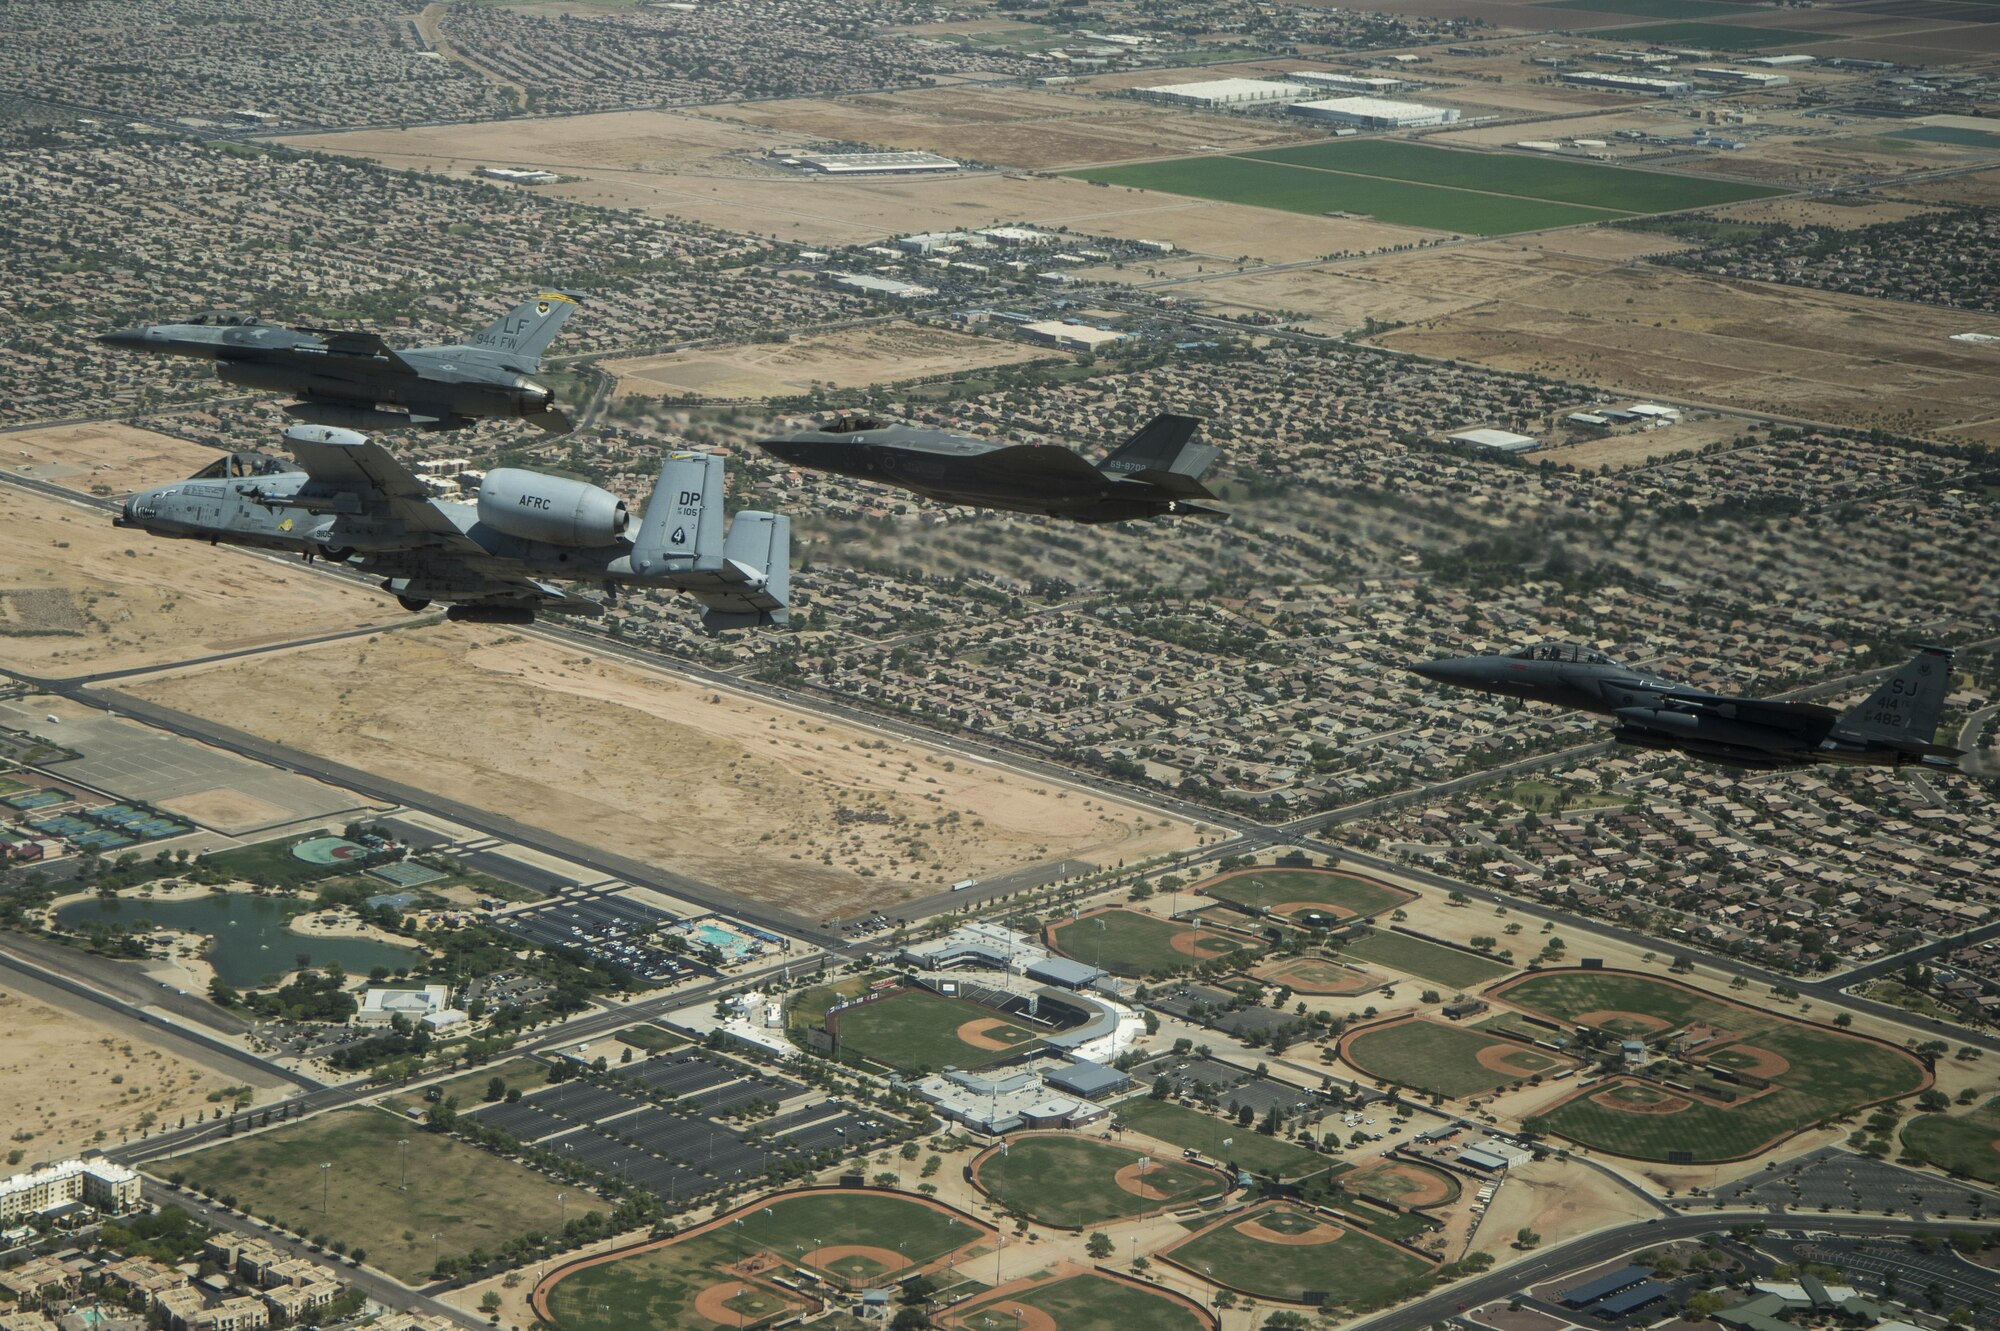 The 944th Fighter Wing, the Air Force Reserve’s largest F-16, A-10, F-15E, and F-35 training wing trains and provides combat-ready Reserve Citizen Airmen, anytime, anywhere. The wing was activated at Luke Air Force Base on July 1, 1987. The wing has since grown and now has 25 subordinate units consisting of four groups, 11 squadrons, three detachments, two flights, four operating locations, and one test center which include geographically separated units
at Davis Monthan Air Force Base, Seymour Johnson Air Force Base, Holloman Air Force Base, and Eglin Air Force Base.

The 944th Fighter Wing is tasked to support worldwide mobility and combat employment operations in conjunction with supporting the Air Education and Training Command, and Air Combat Command mission to train F-16, F-15E, F-35, and A-10 pilots for the United States Air Force, Air Force Reserve, Air National Guard and other participating nations.